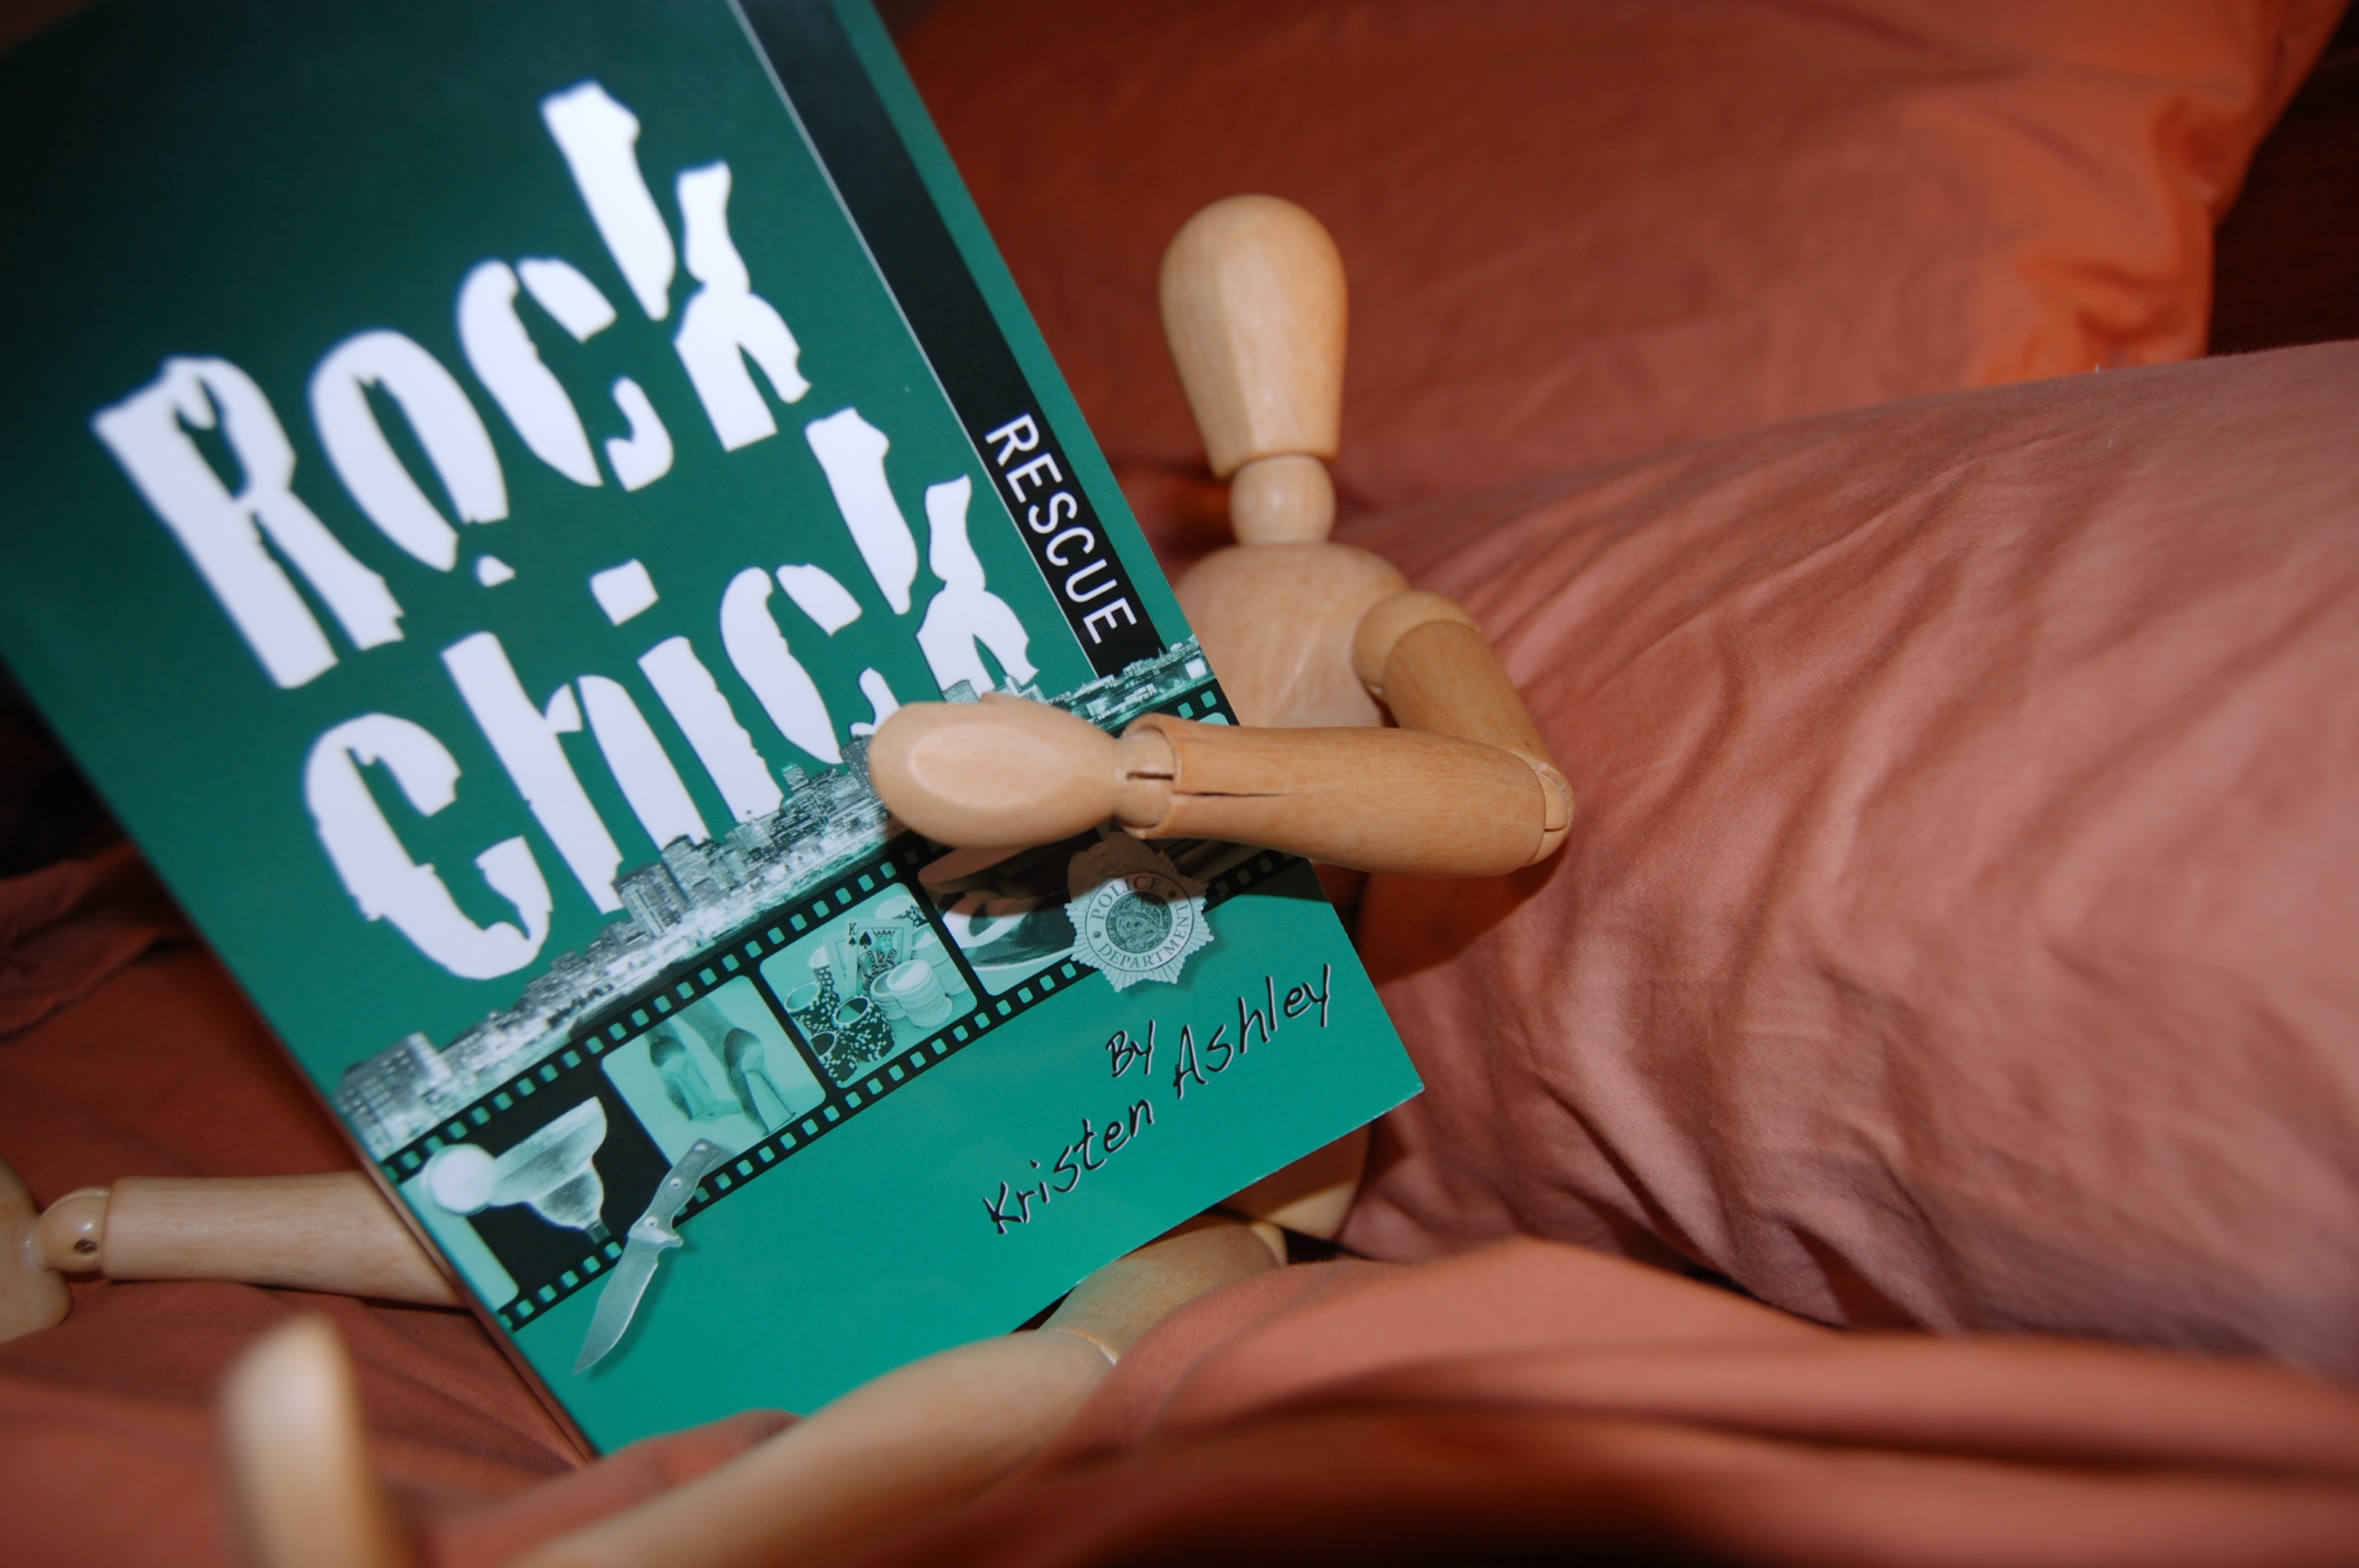 Reading Rock Chick Rescue in bed